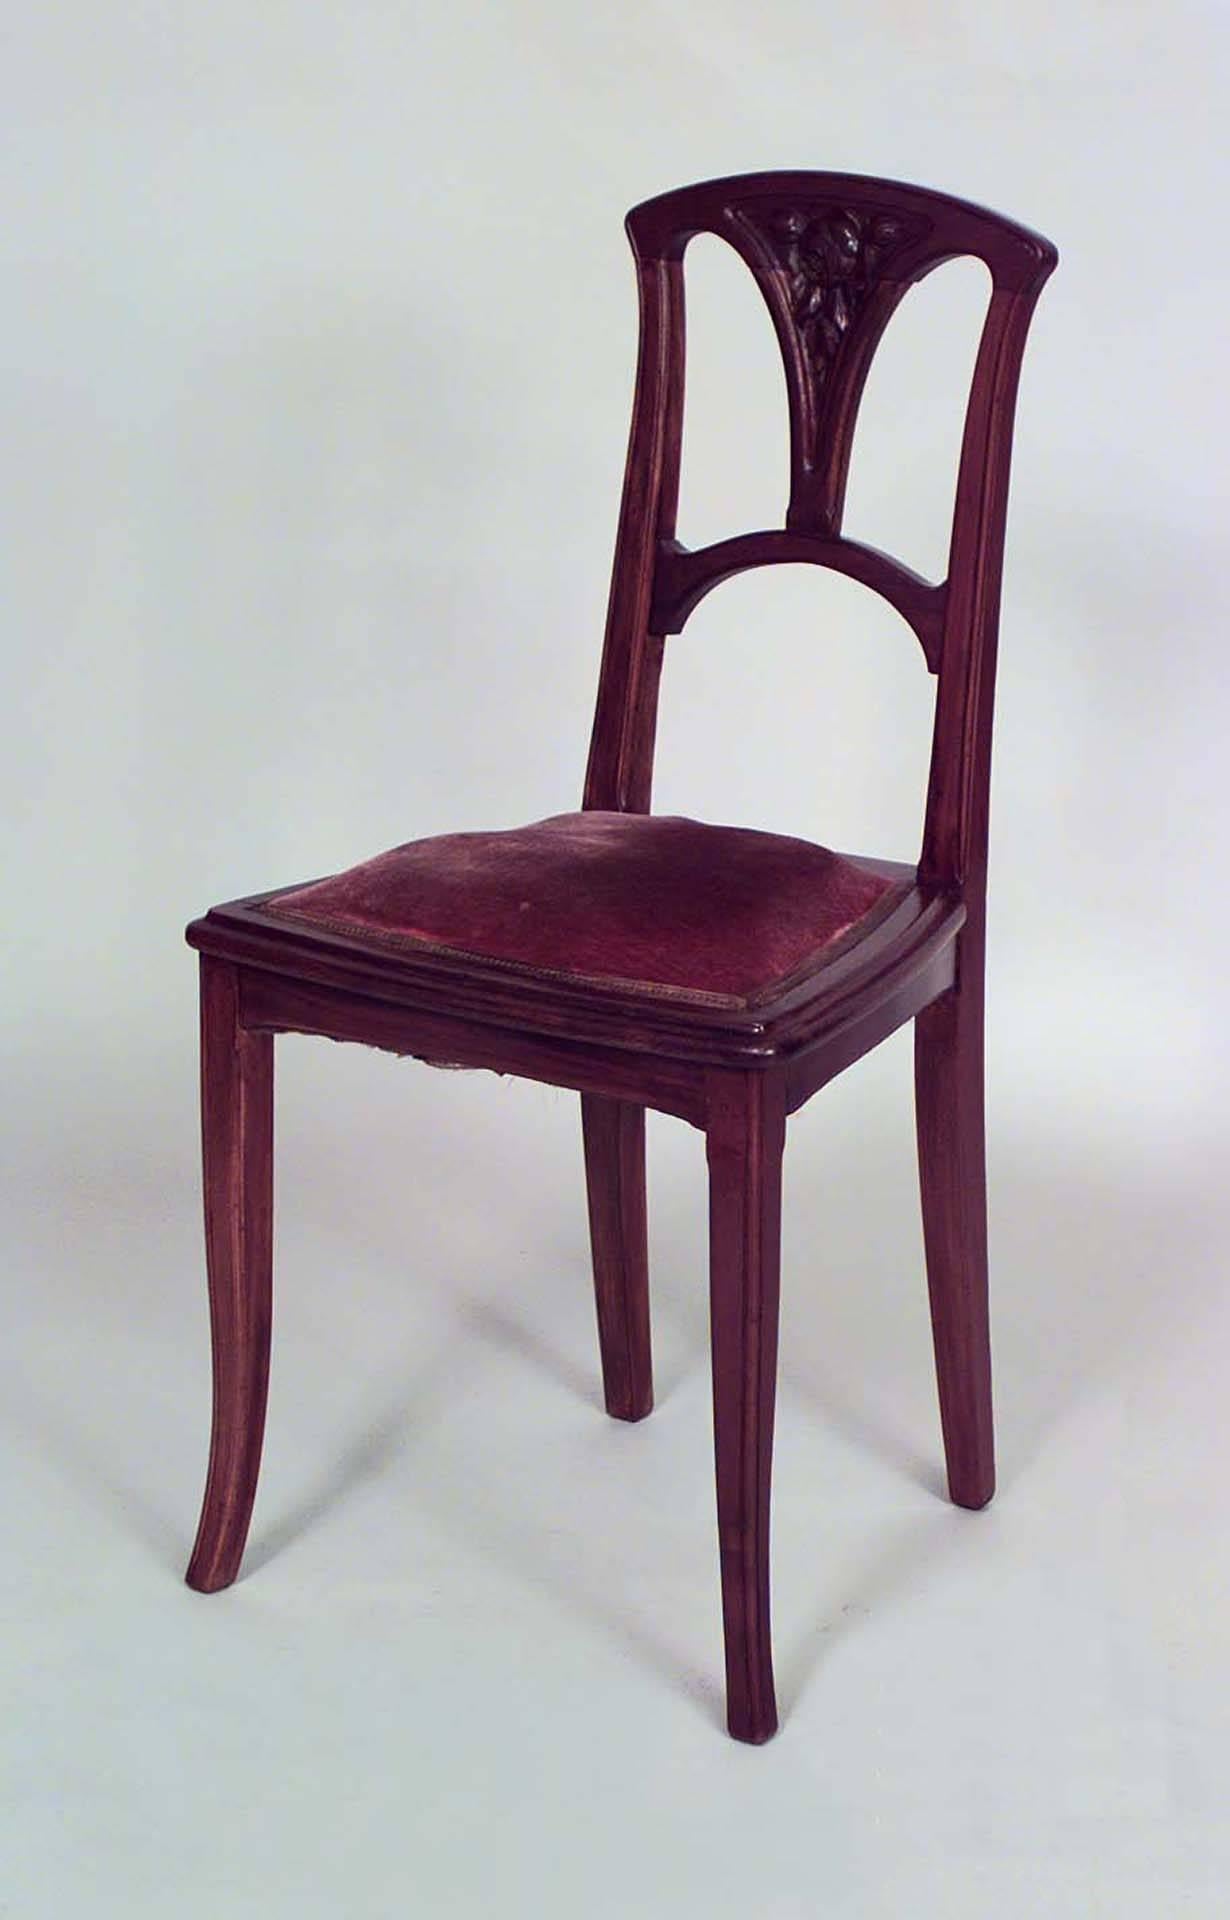 French Art Nouveau walnut open back side chair with carved floral design and pink velvet seat.
